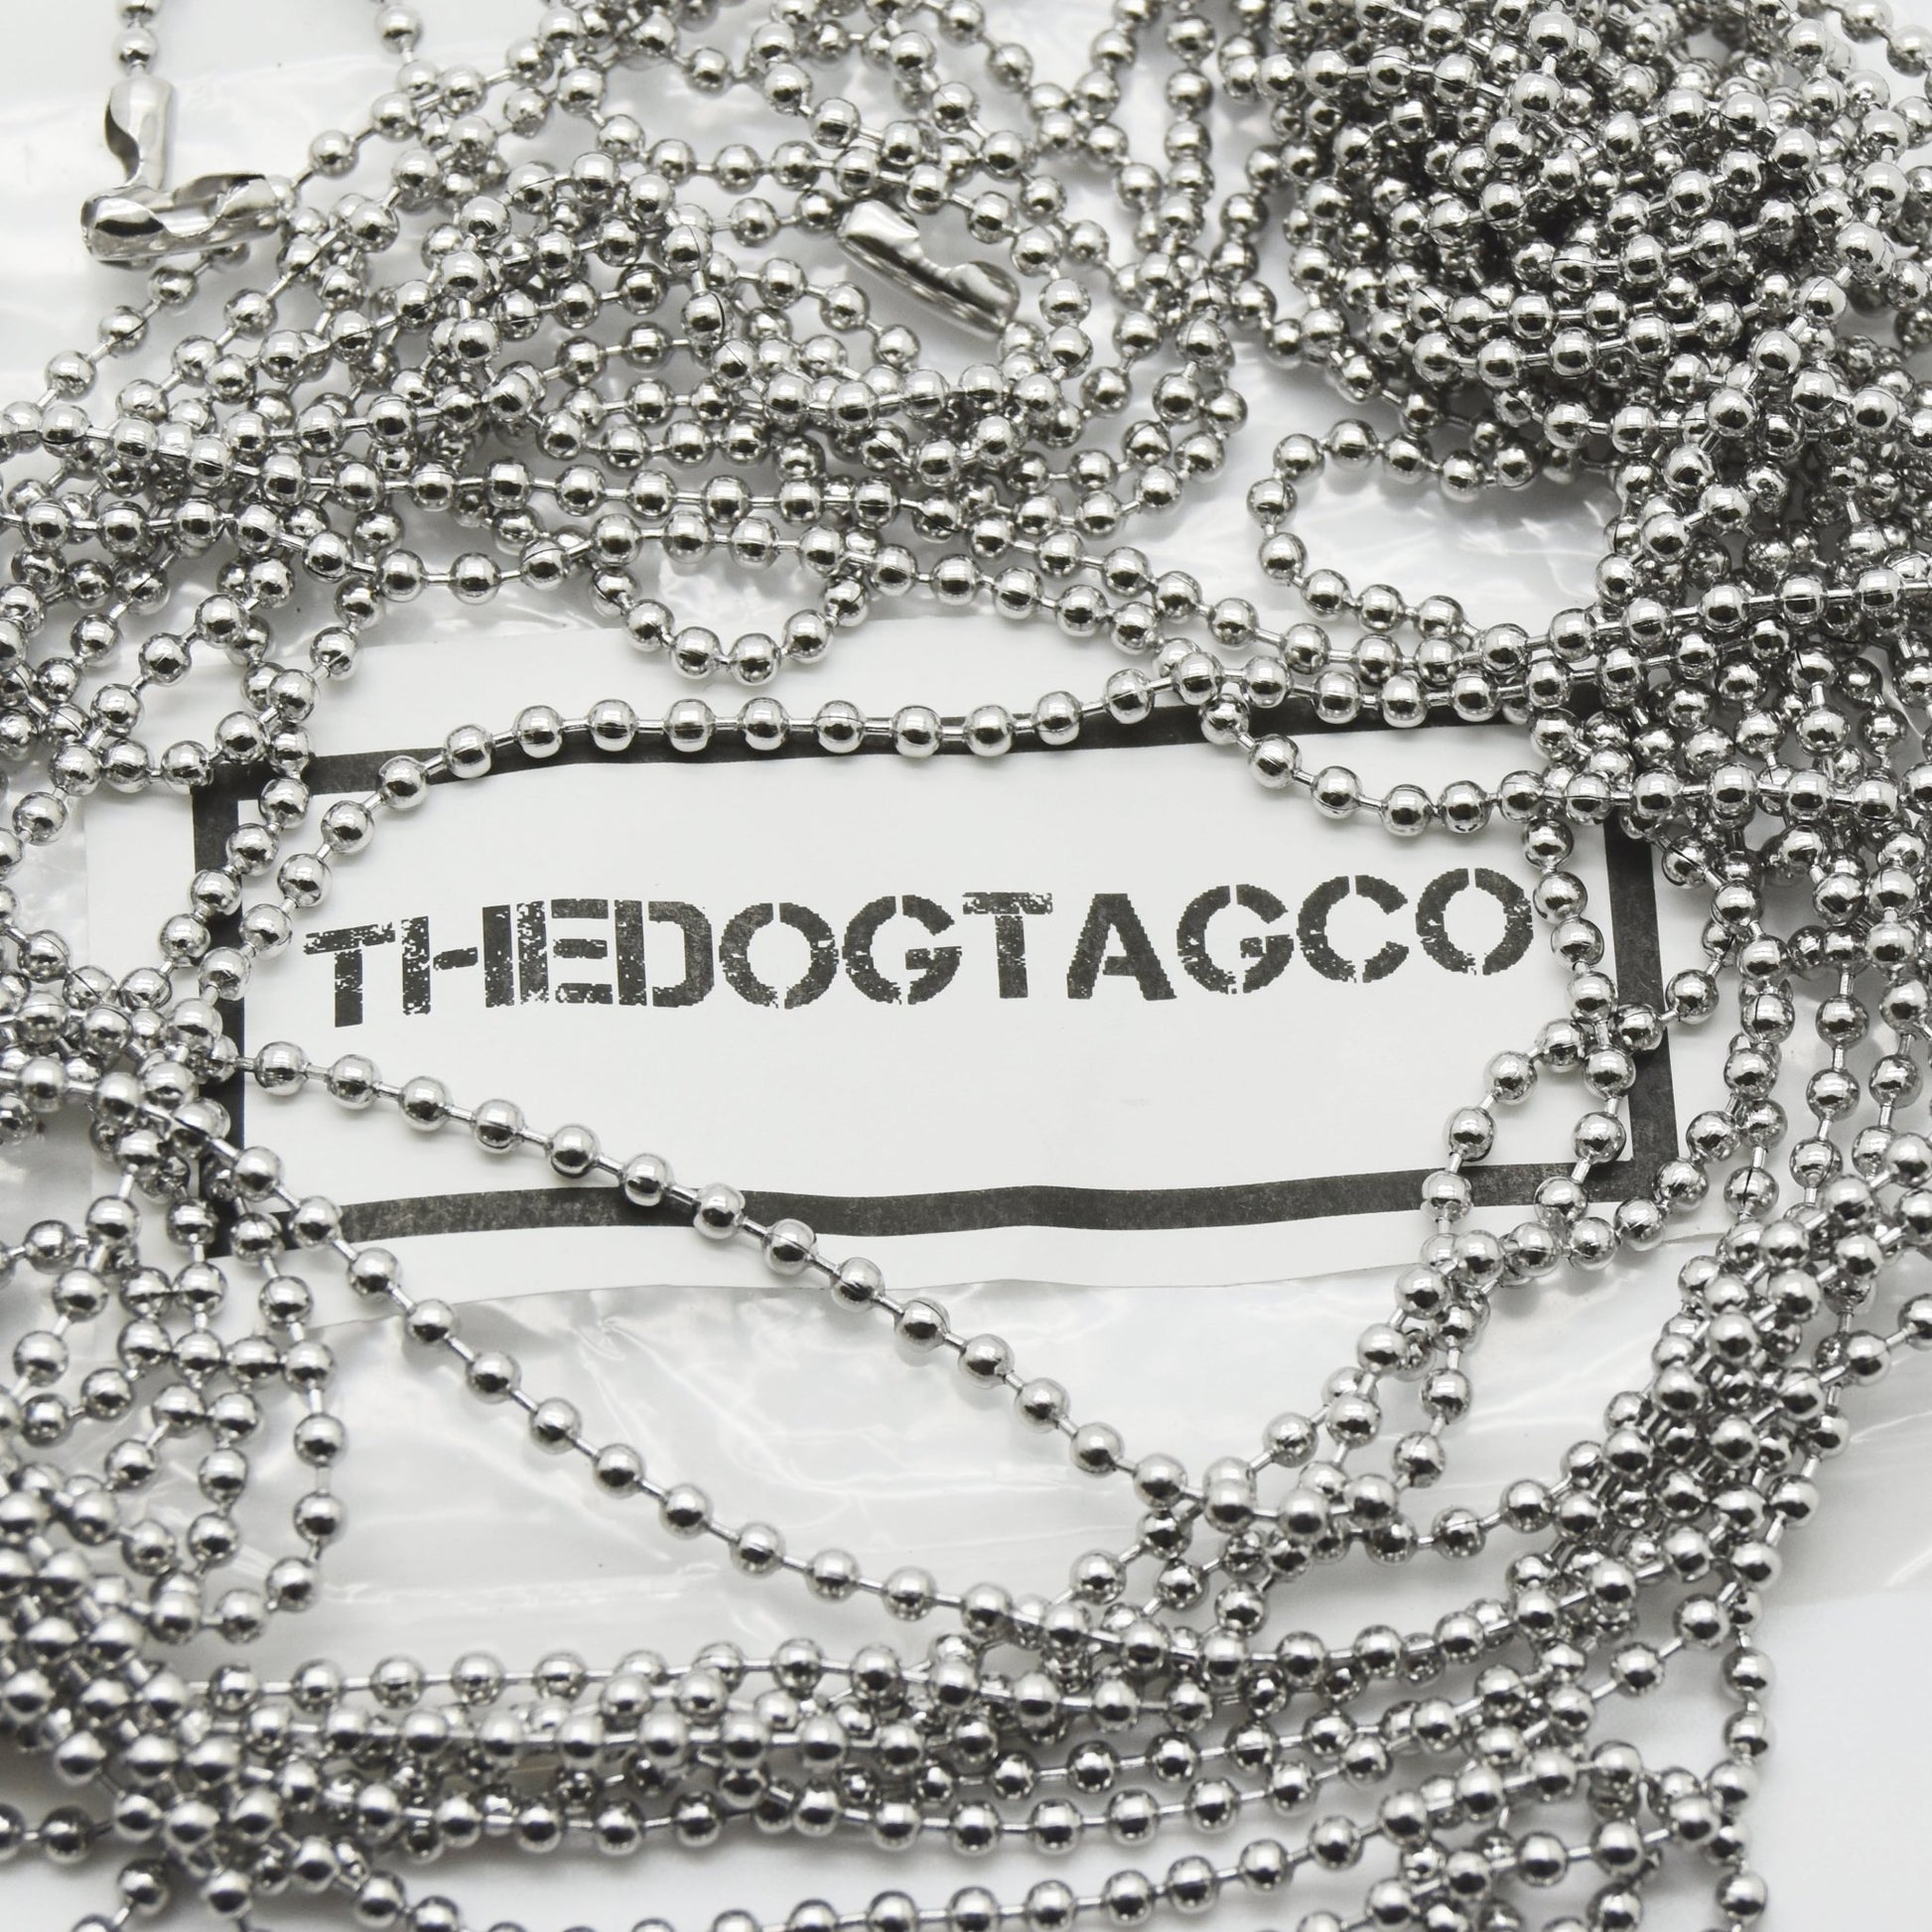 Stainless Steel Bead Ball Chains 27" For Dog Tags Necklaces (x10) - TheDogTagCo